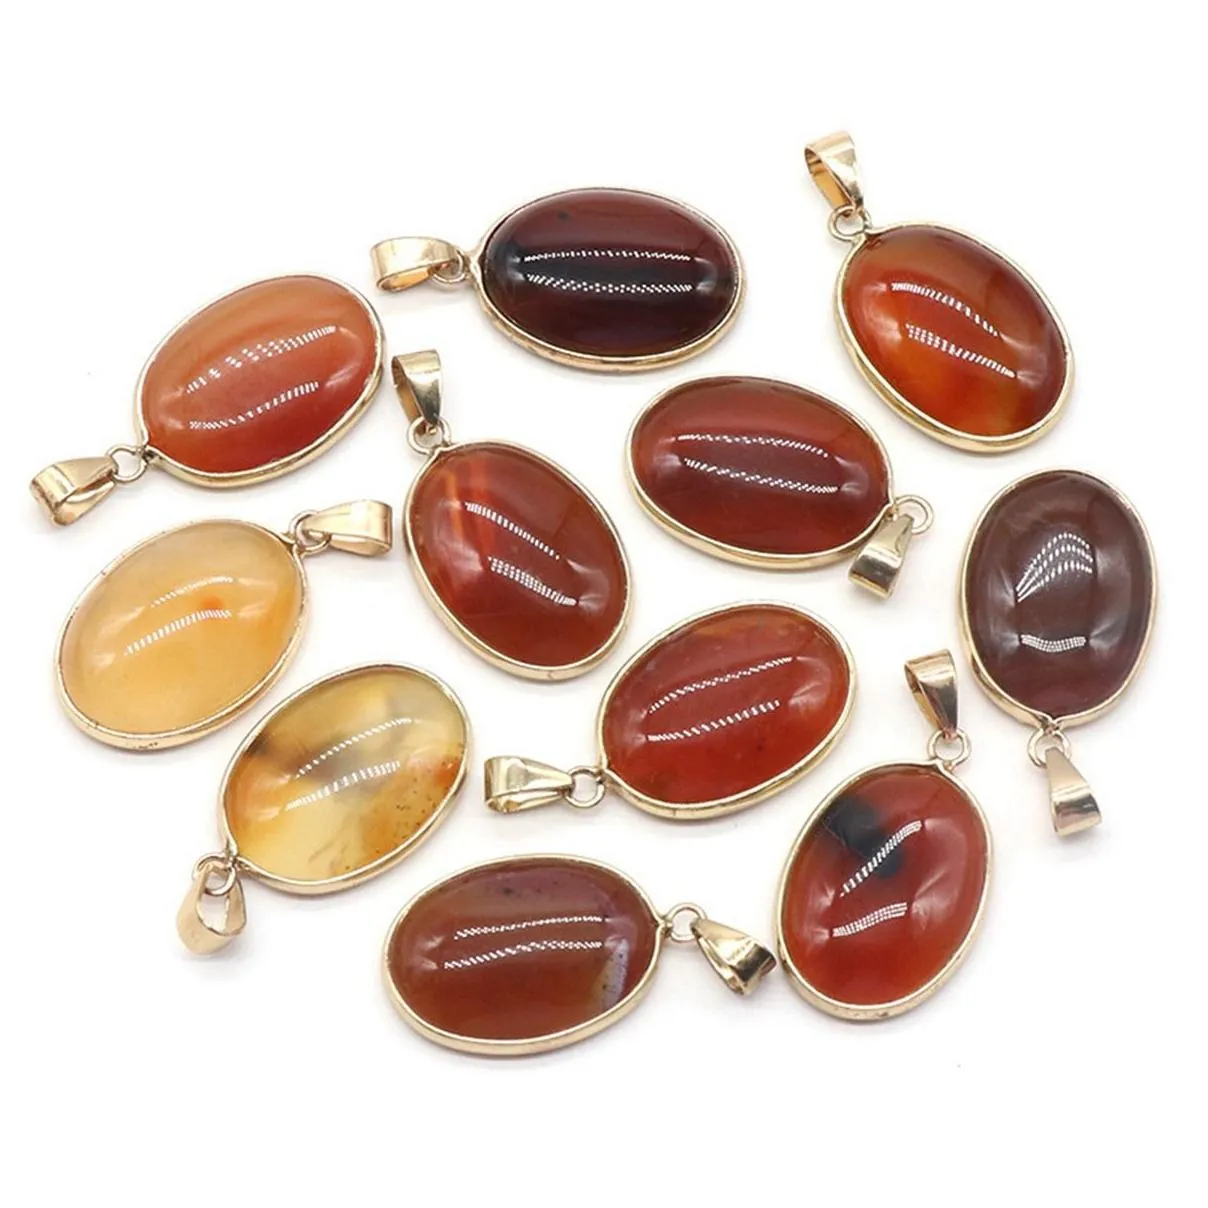 18x25mm Natural Carnelian Stone Irregular Waterdrop Shape Exquisite Quartz Agate Charms for Jewelry Making Necklace Bracelet